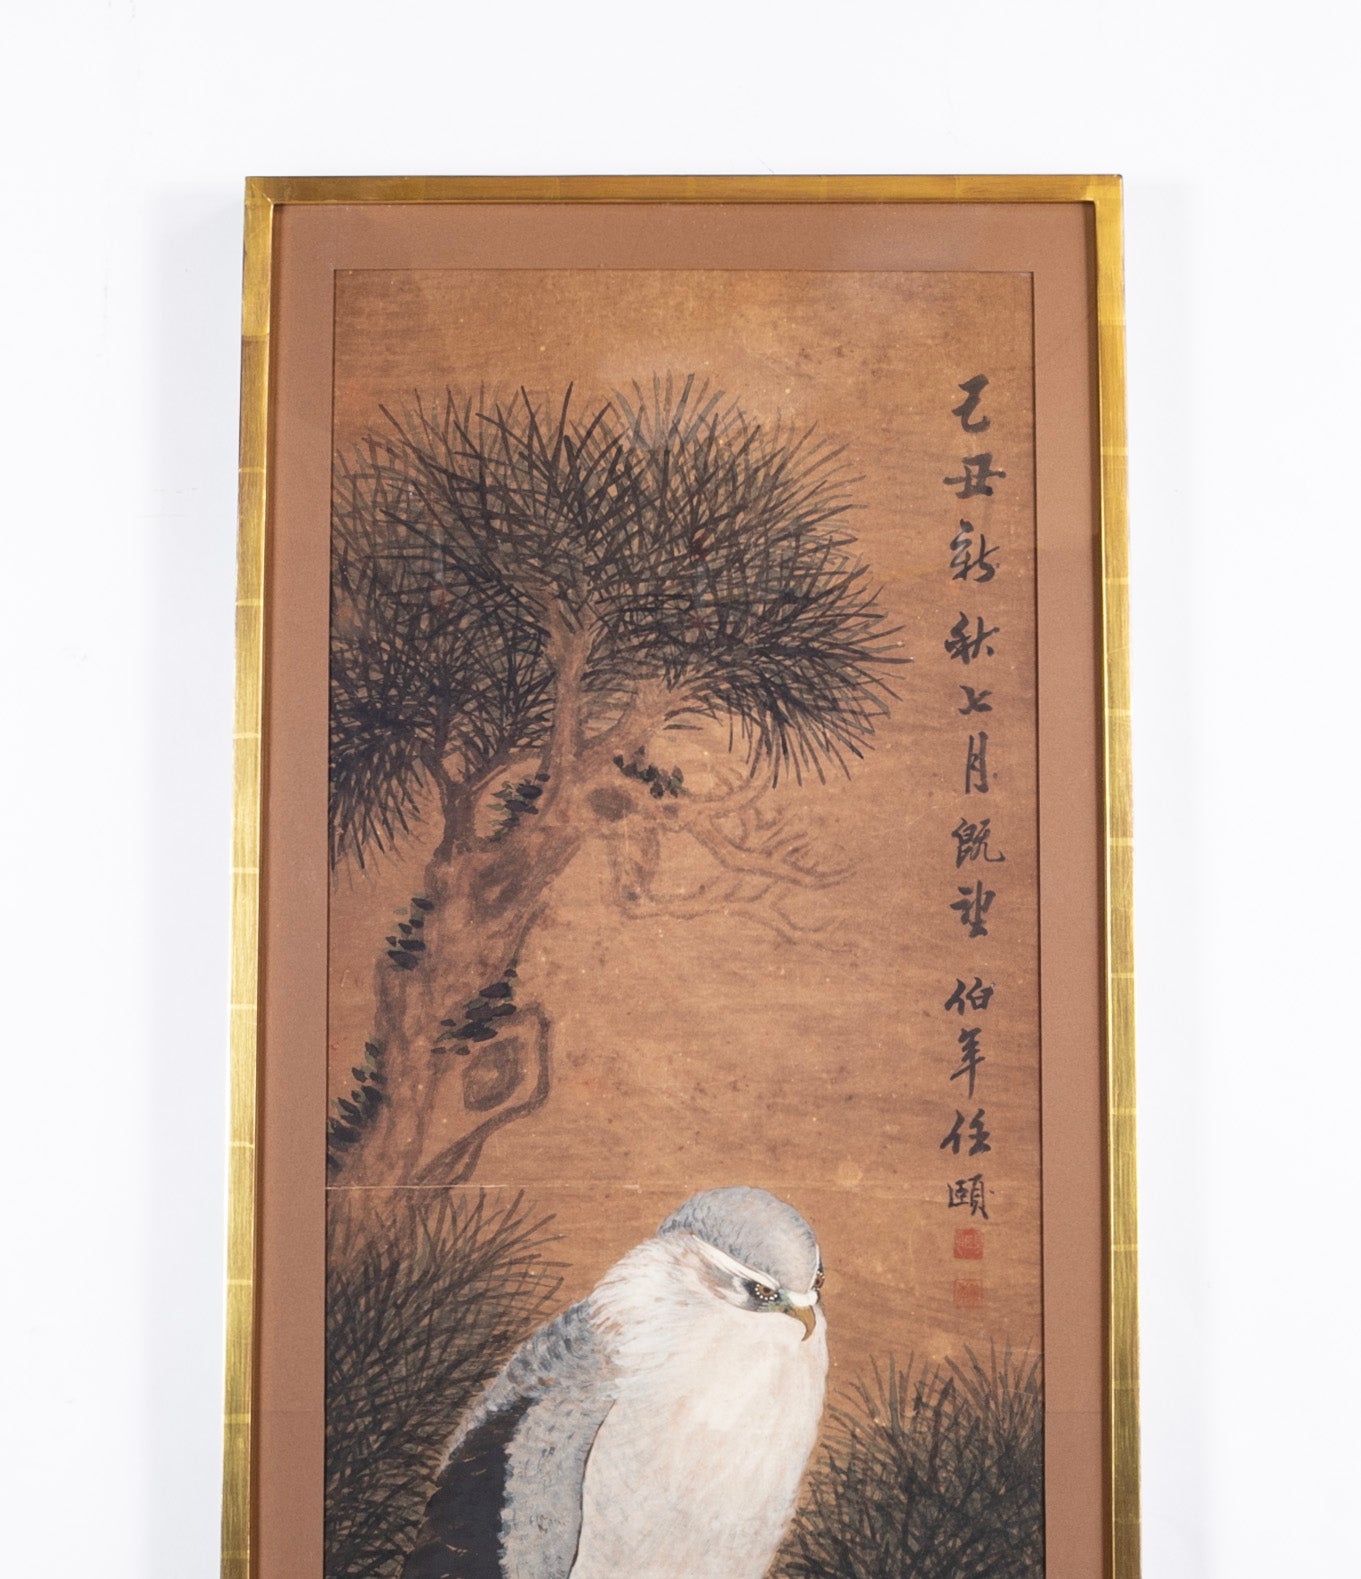 Late 19th Century Japanese Vertical Scroll Painting now Framed